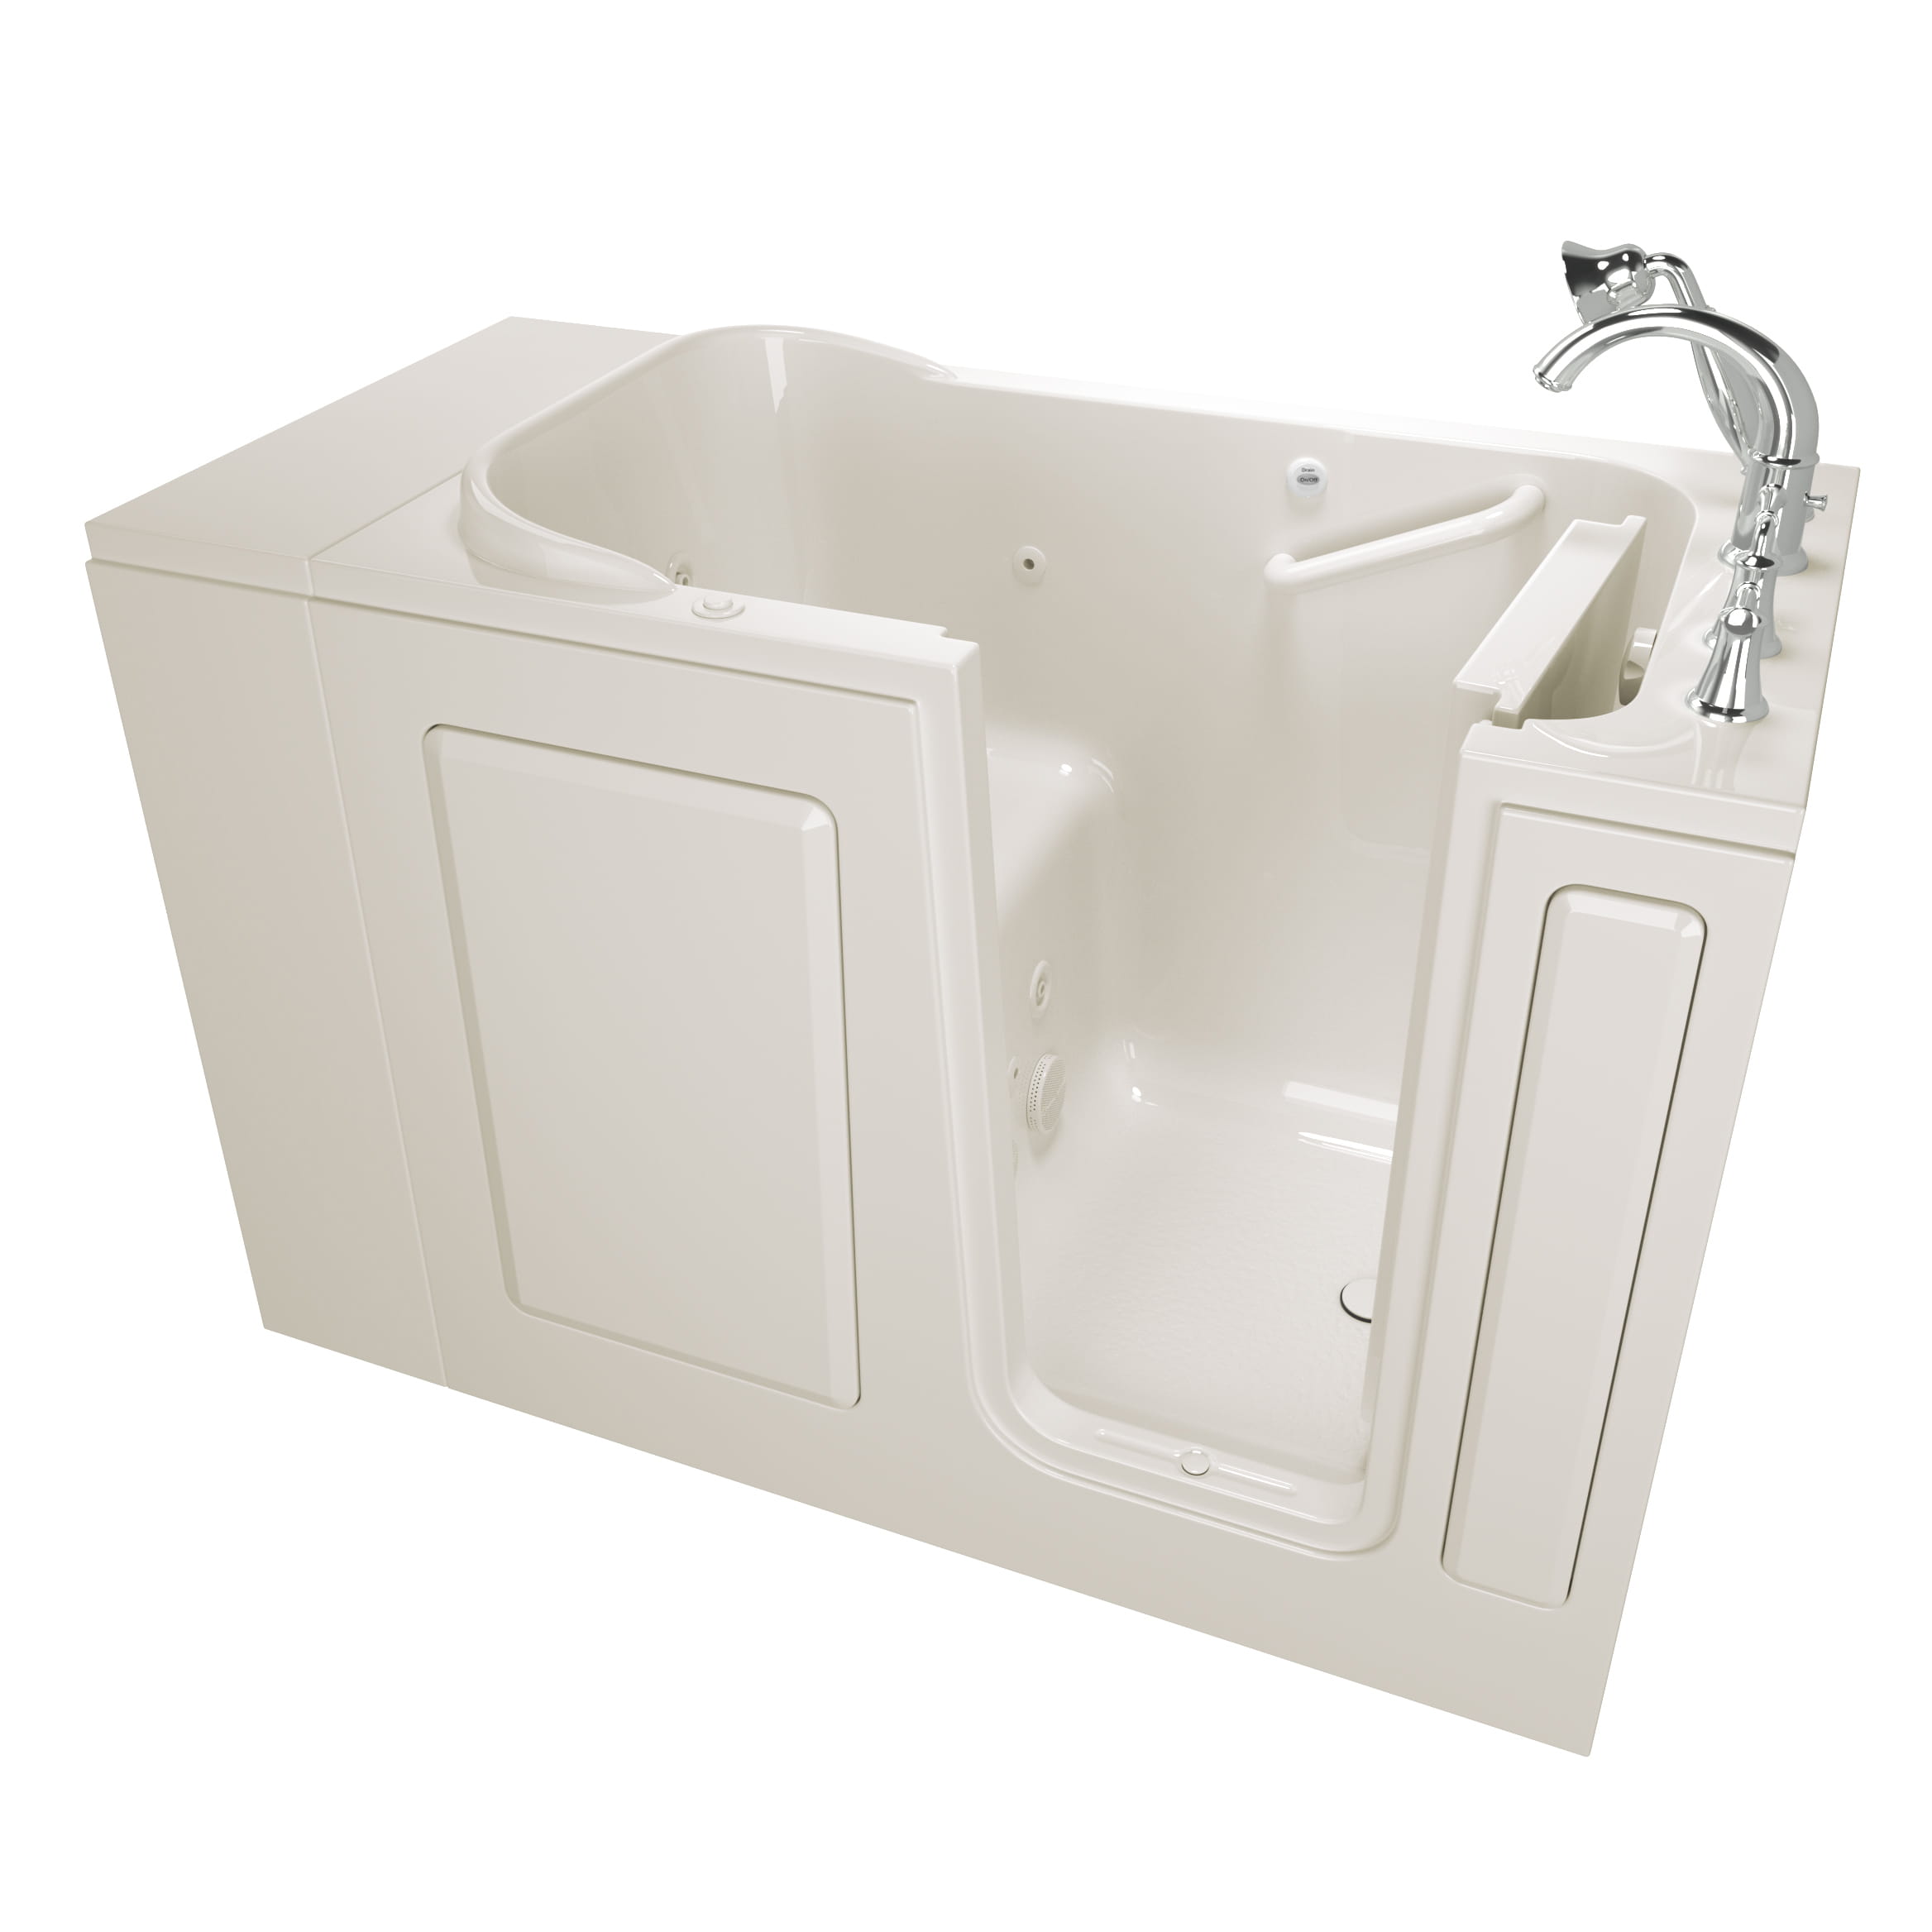 Gelcoat Value Series 28 x 48 Inch Walk in Tub With Whirlpool System   Right Hand Drain With Faucet WIB LINEN